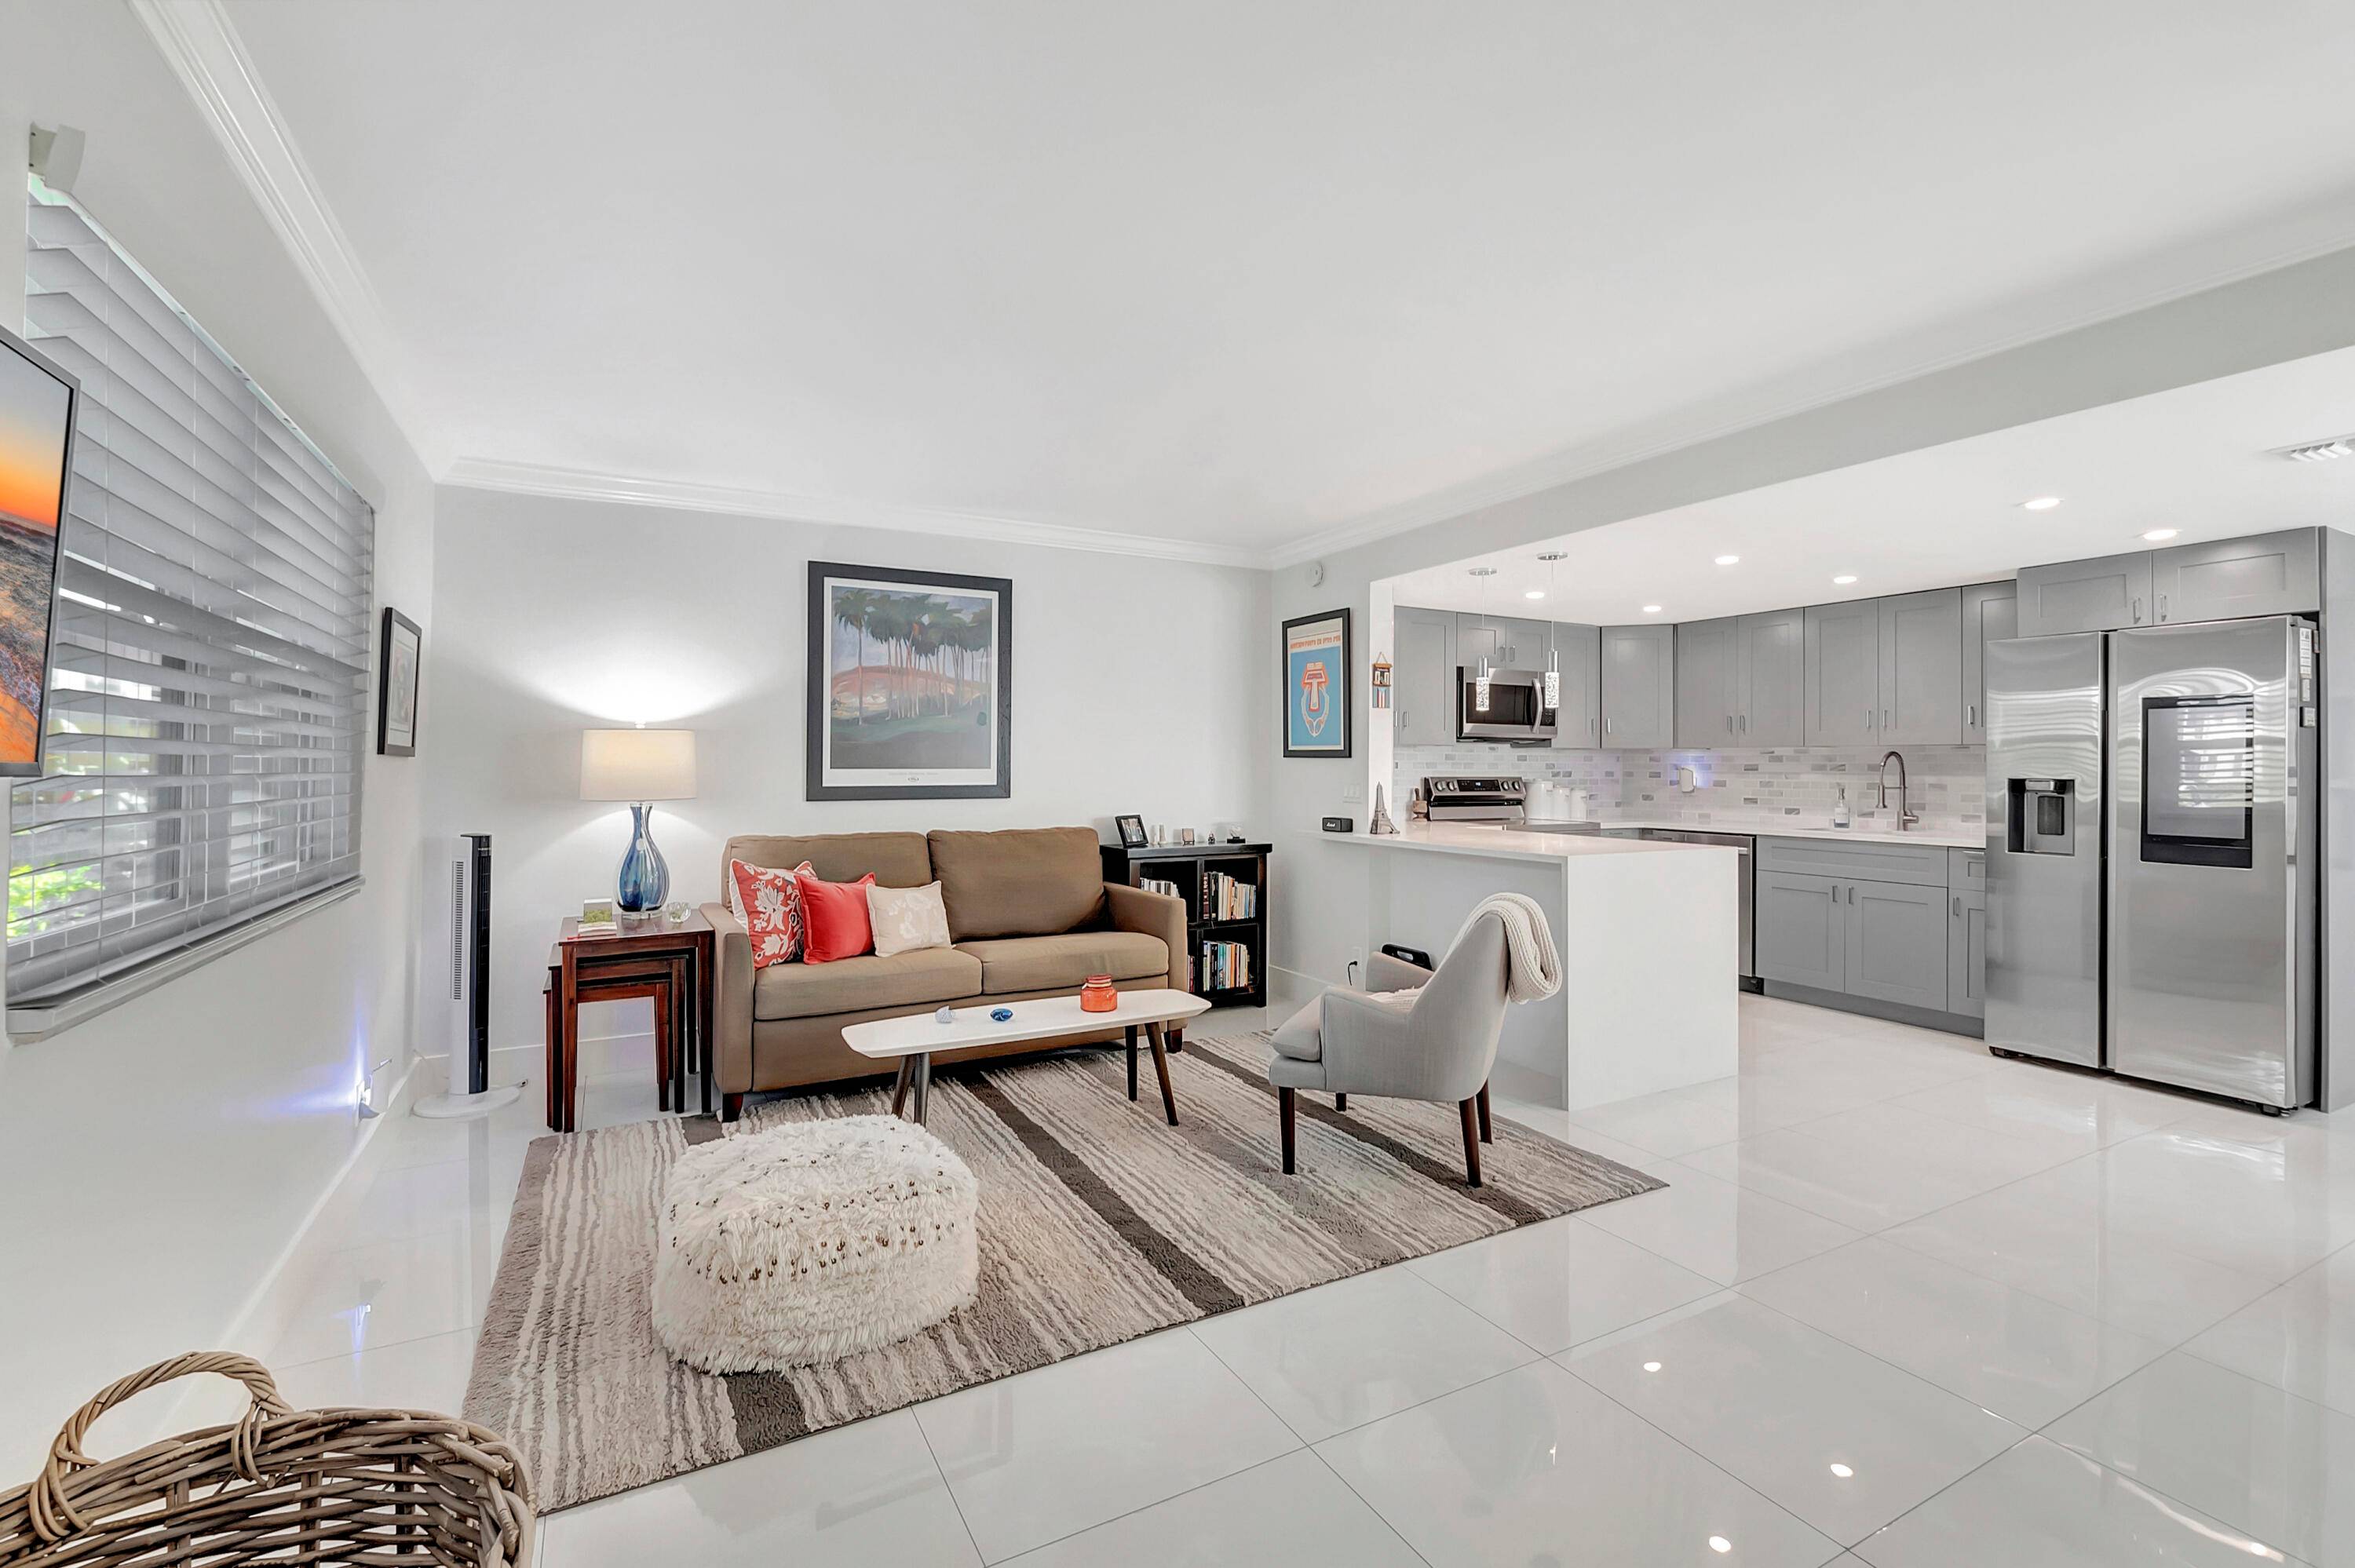 WOW WOW WOW ! ! Come take a look at this amazing custom designer ground floor 1 Bed 1.